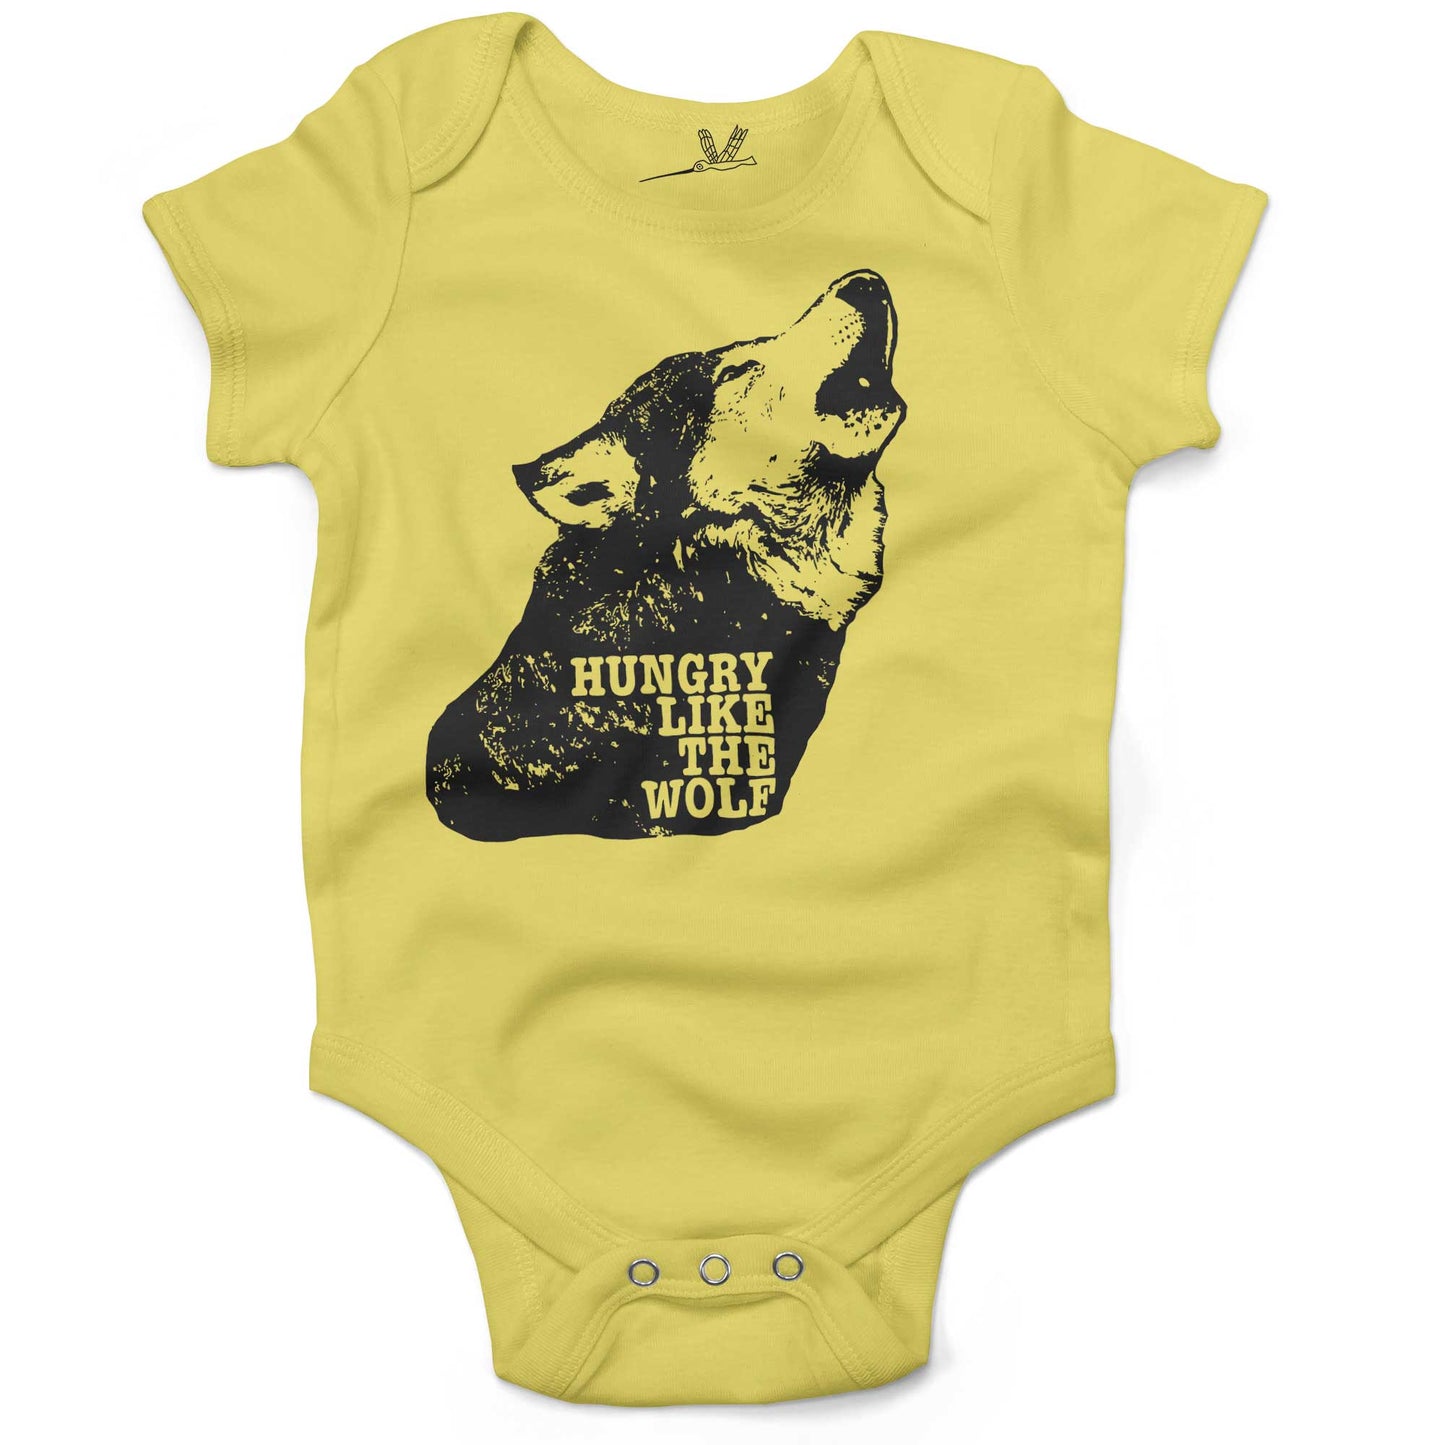 Hungry Like The Wolf Infant Bodysuit or Raglan Baby Tee-Yellow-3-6 months